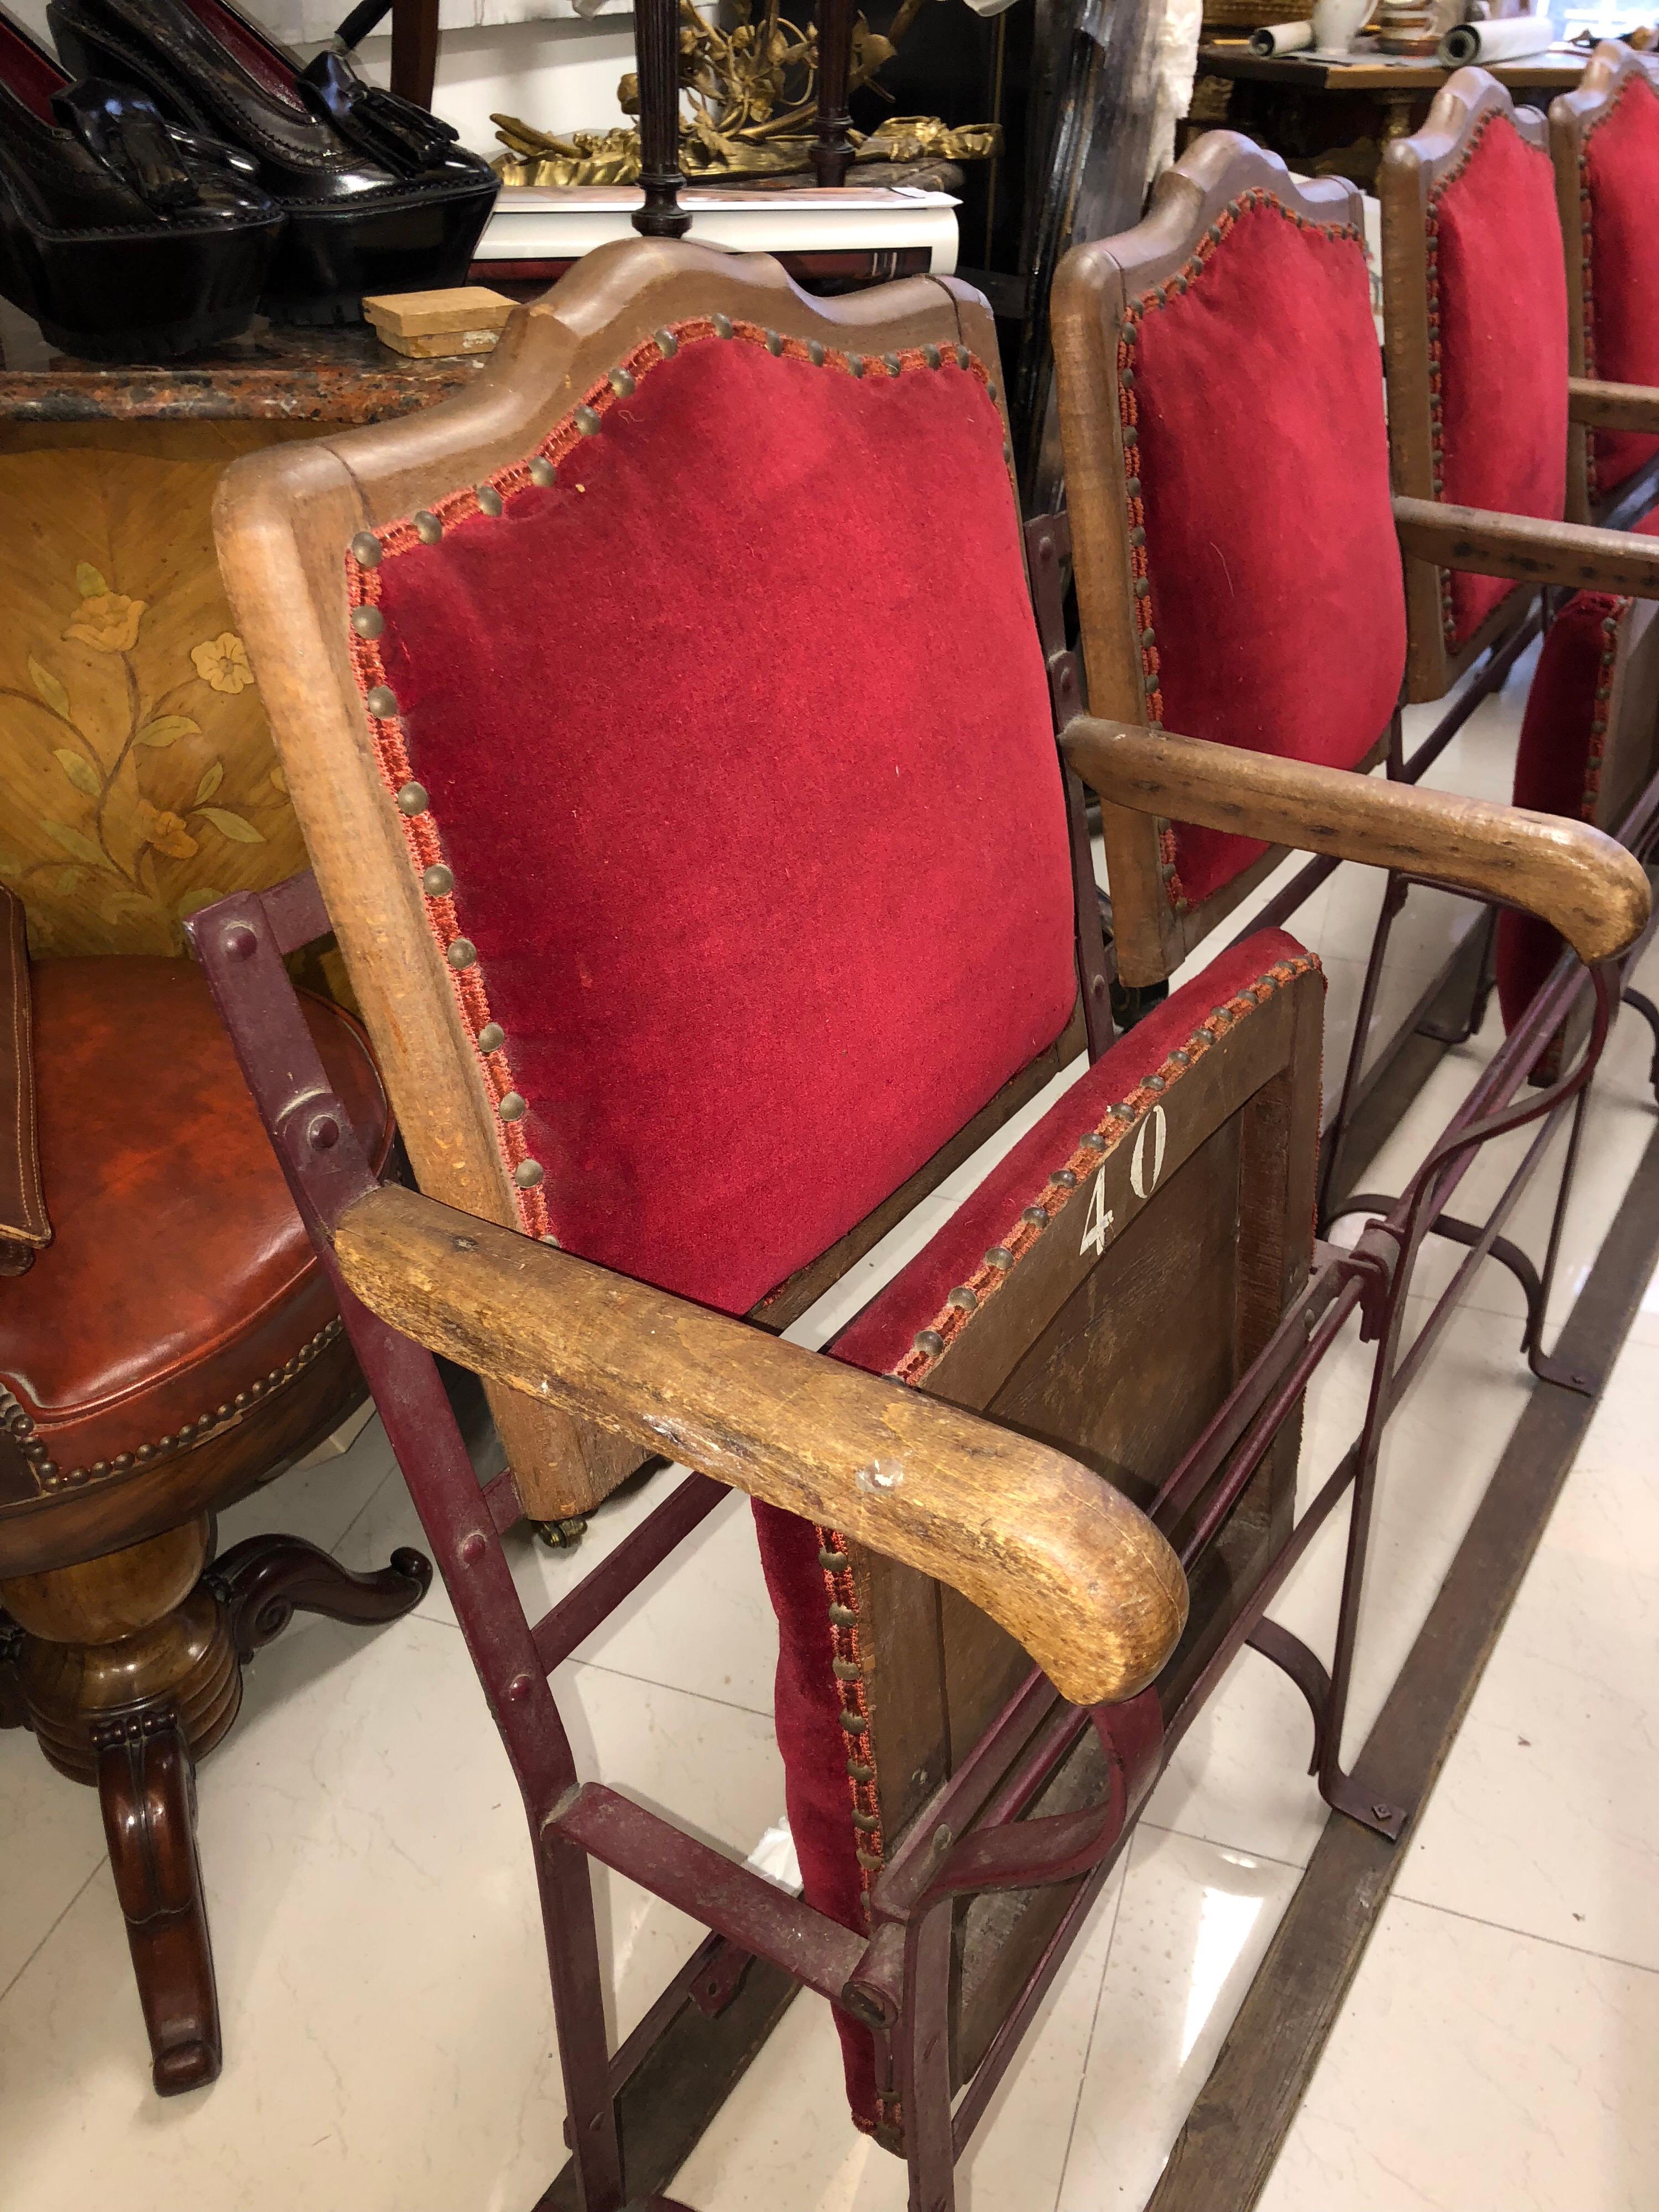 Four-seat cinema seats in wood and metal with tilting seats, upholstered in red velvet. Measures: Width 196 cm
France, circa 1920.